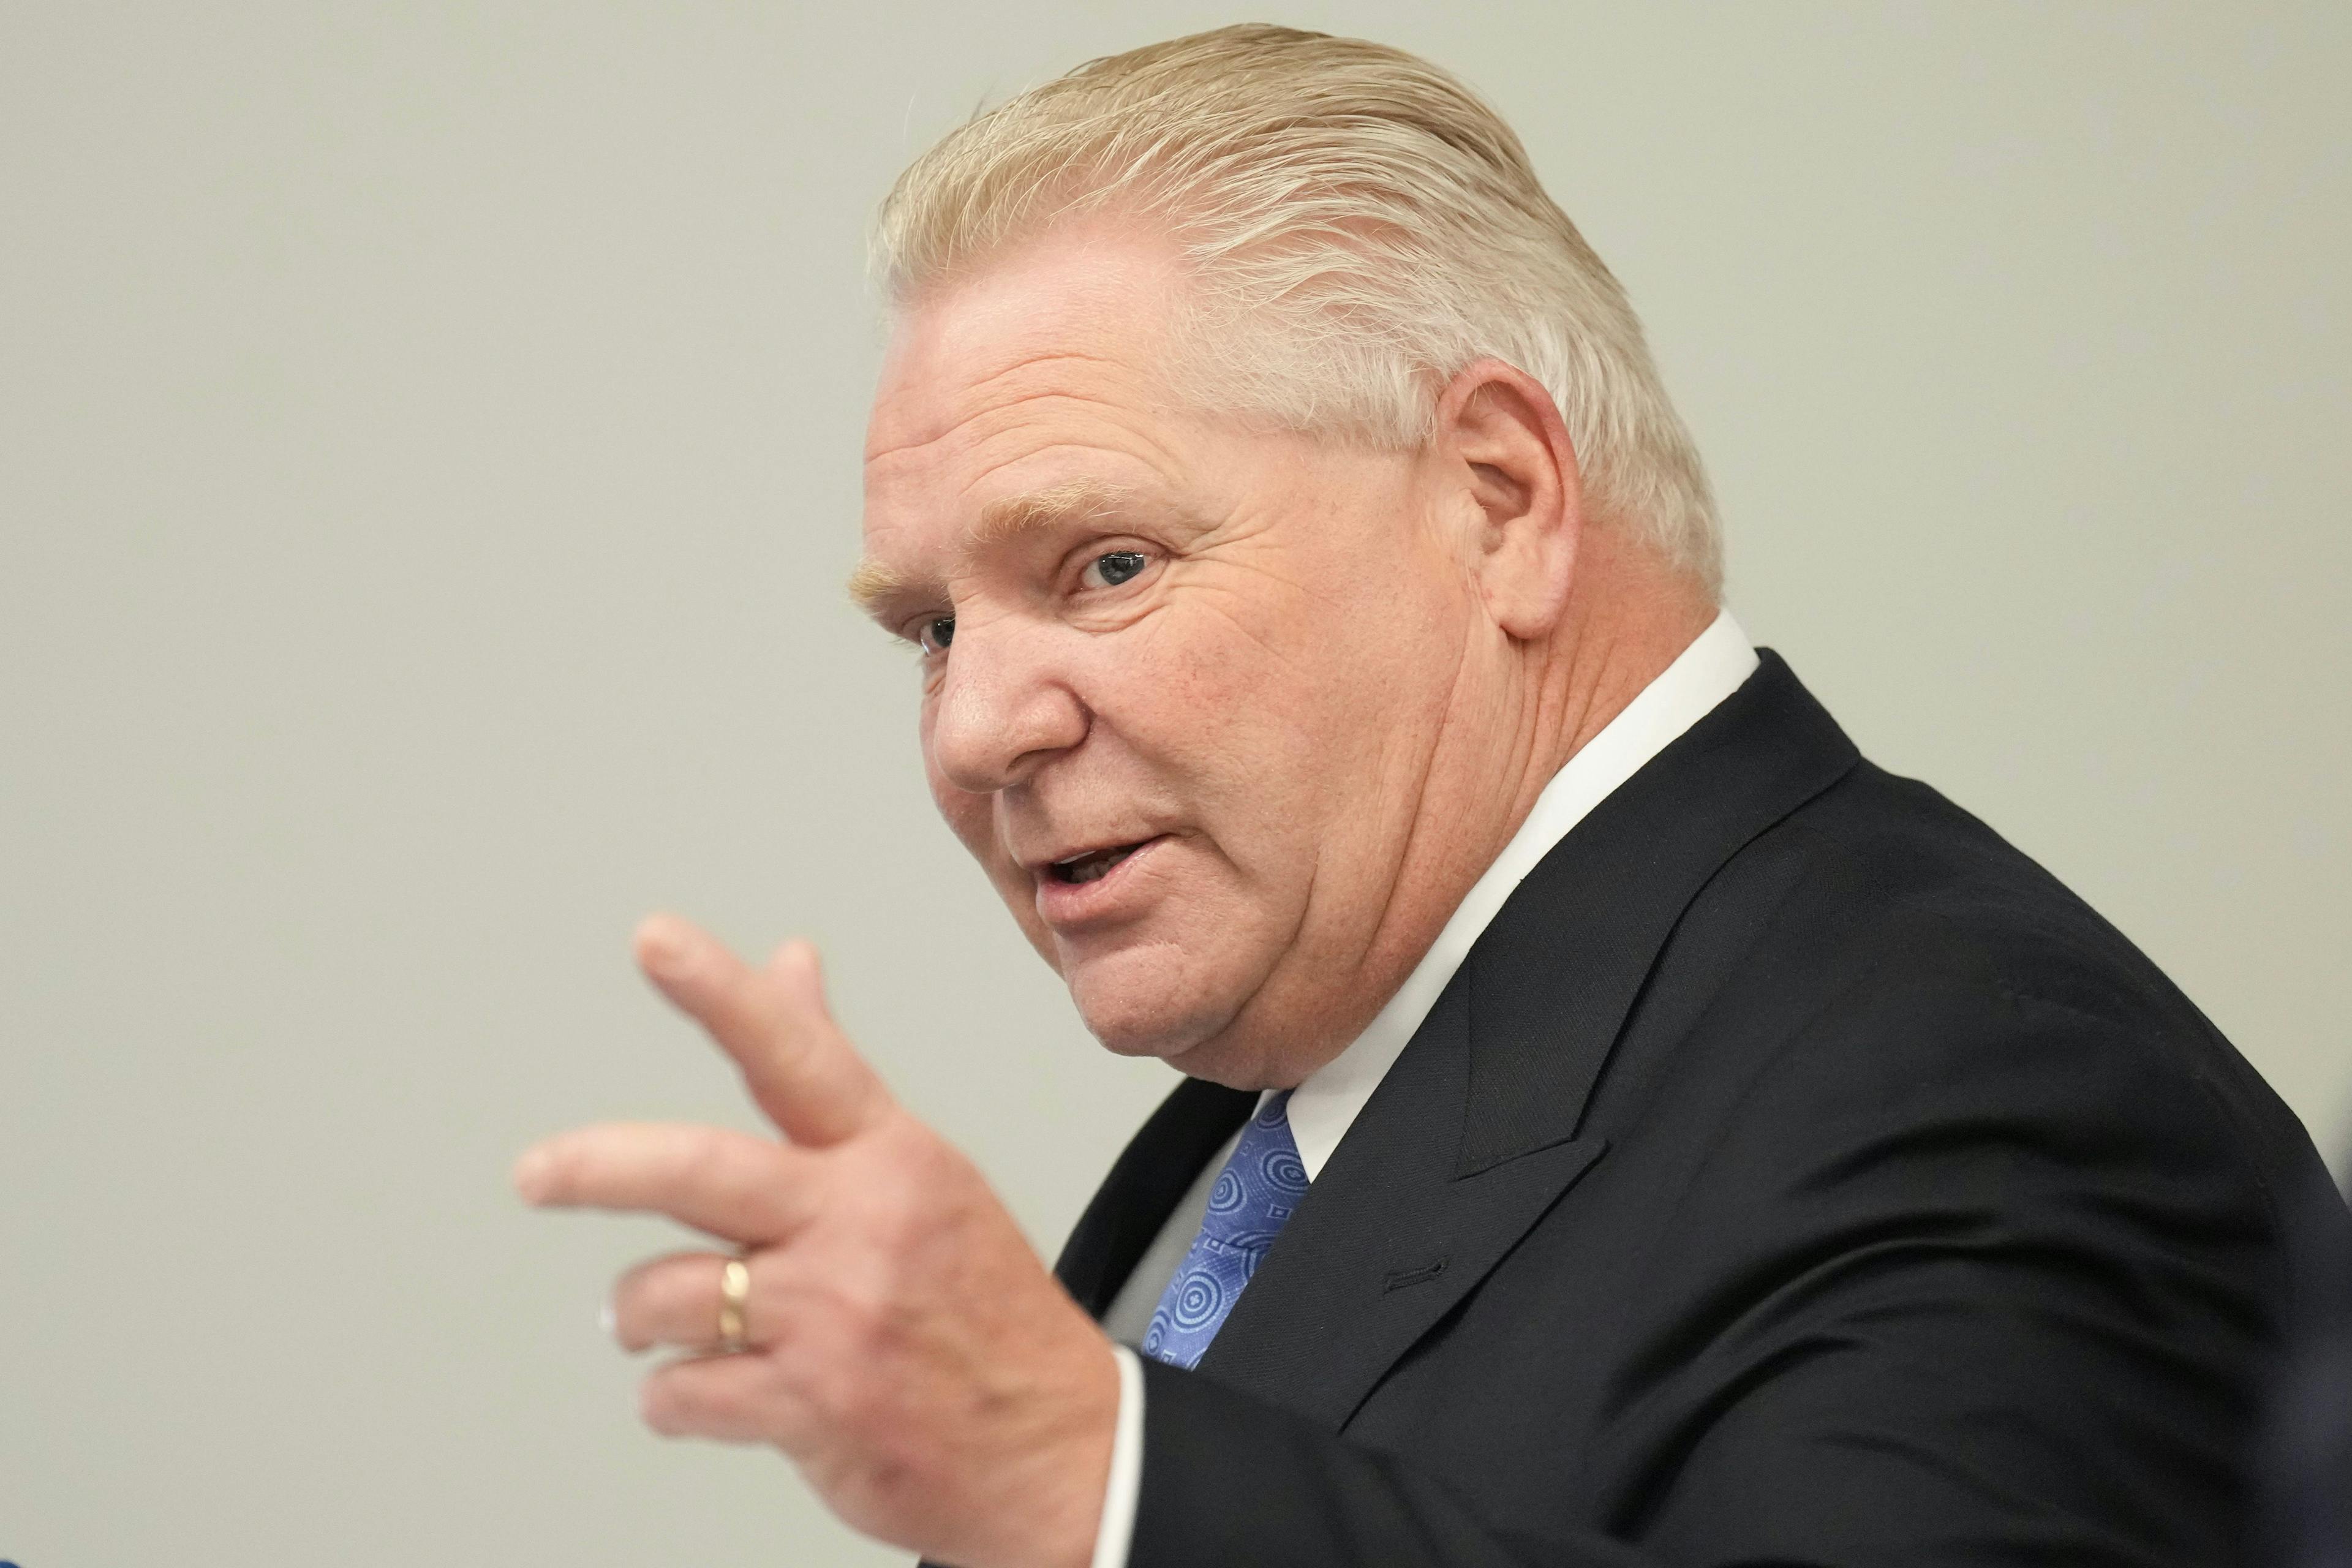 Premier Ford blasts gas price hike, calls it "unacceptable" and "disgusting"